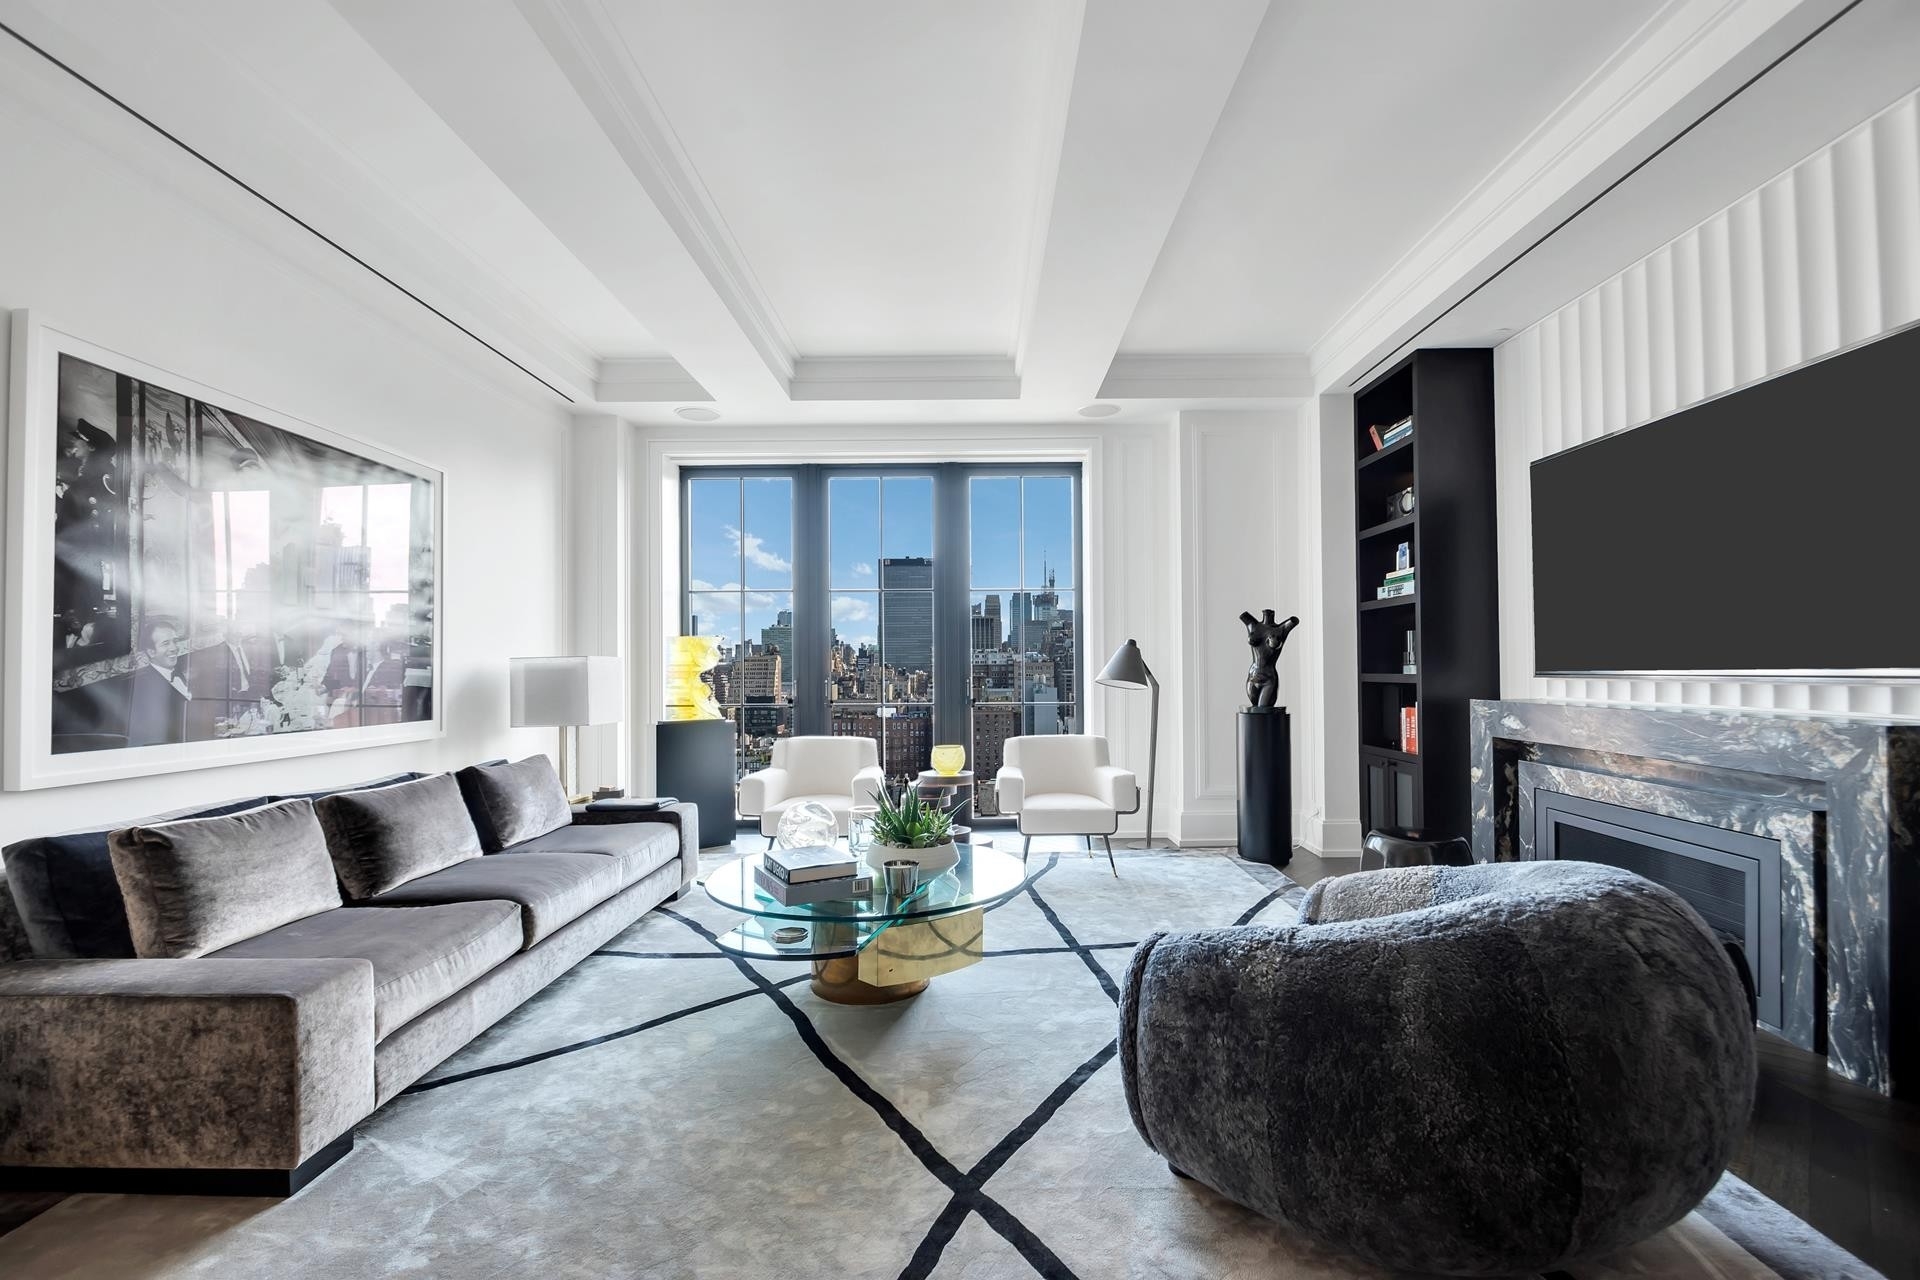 Property at Walker Tower, 212 W 18TH ST , 16D Chelsea, New York, NY 10011